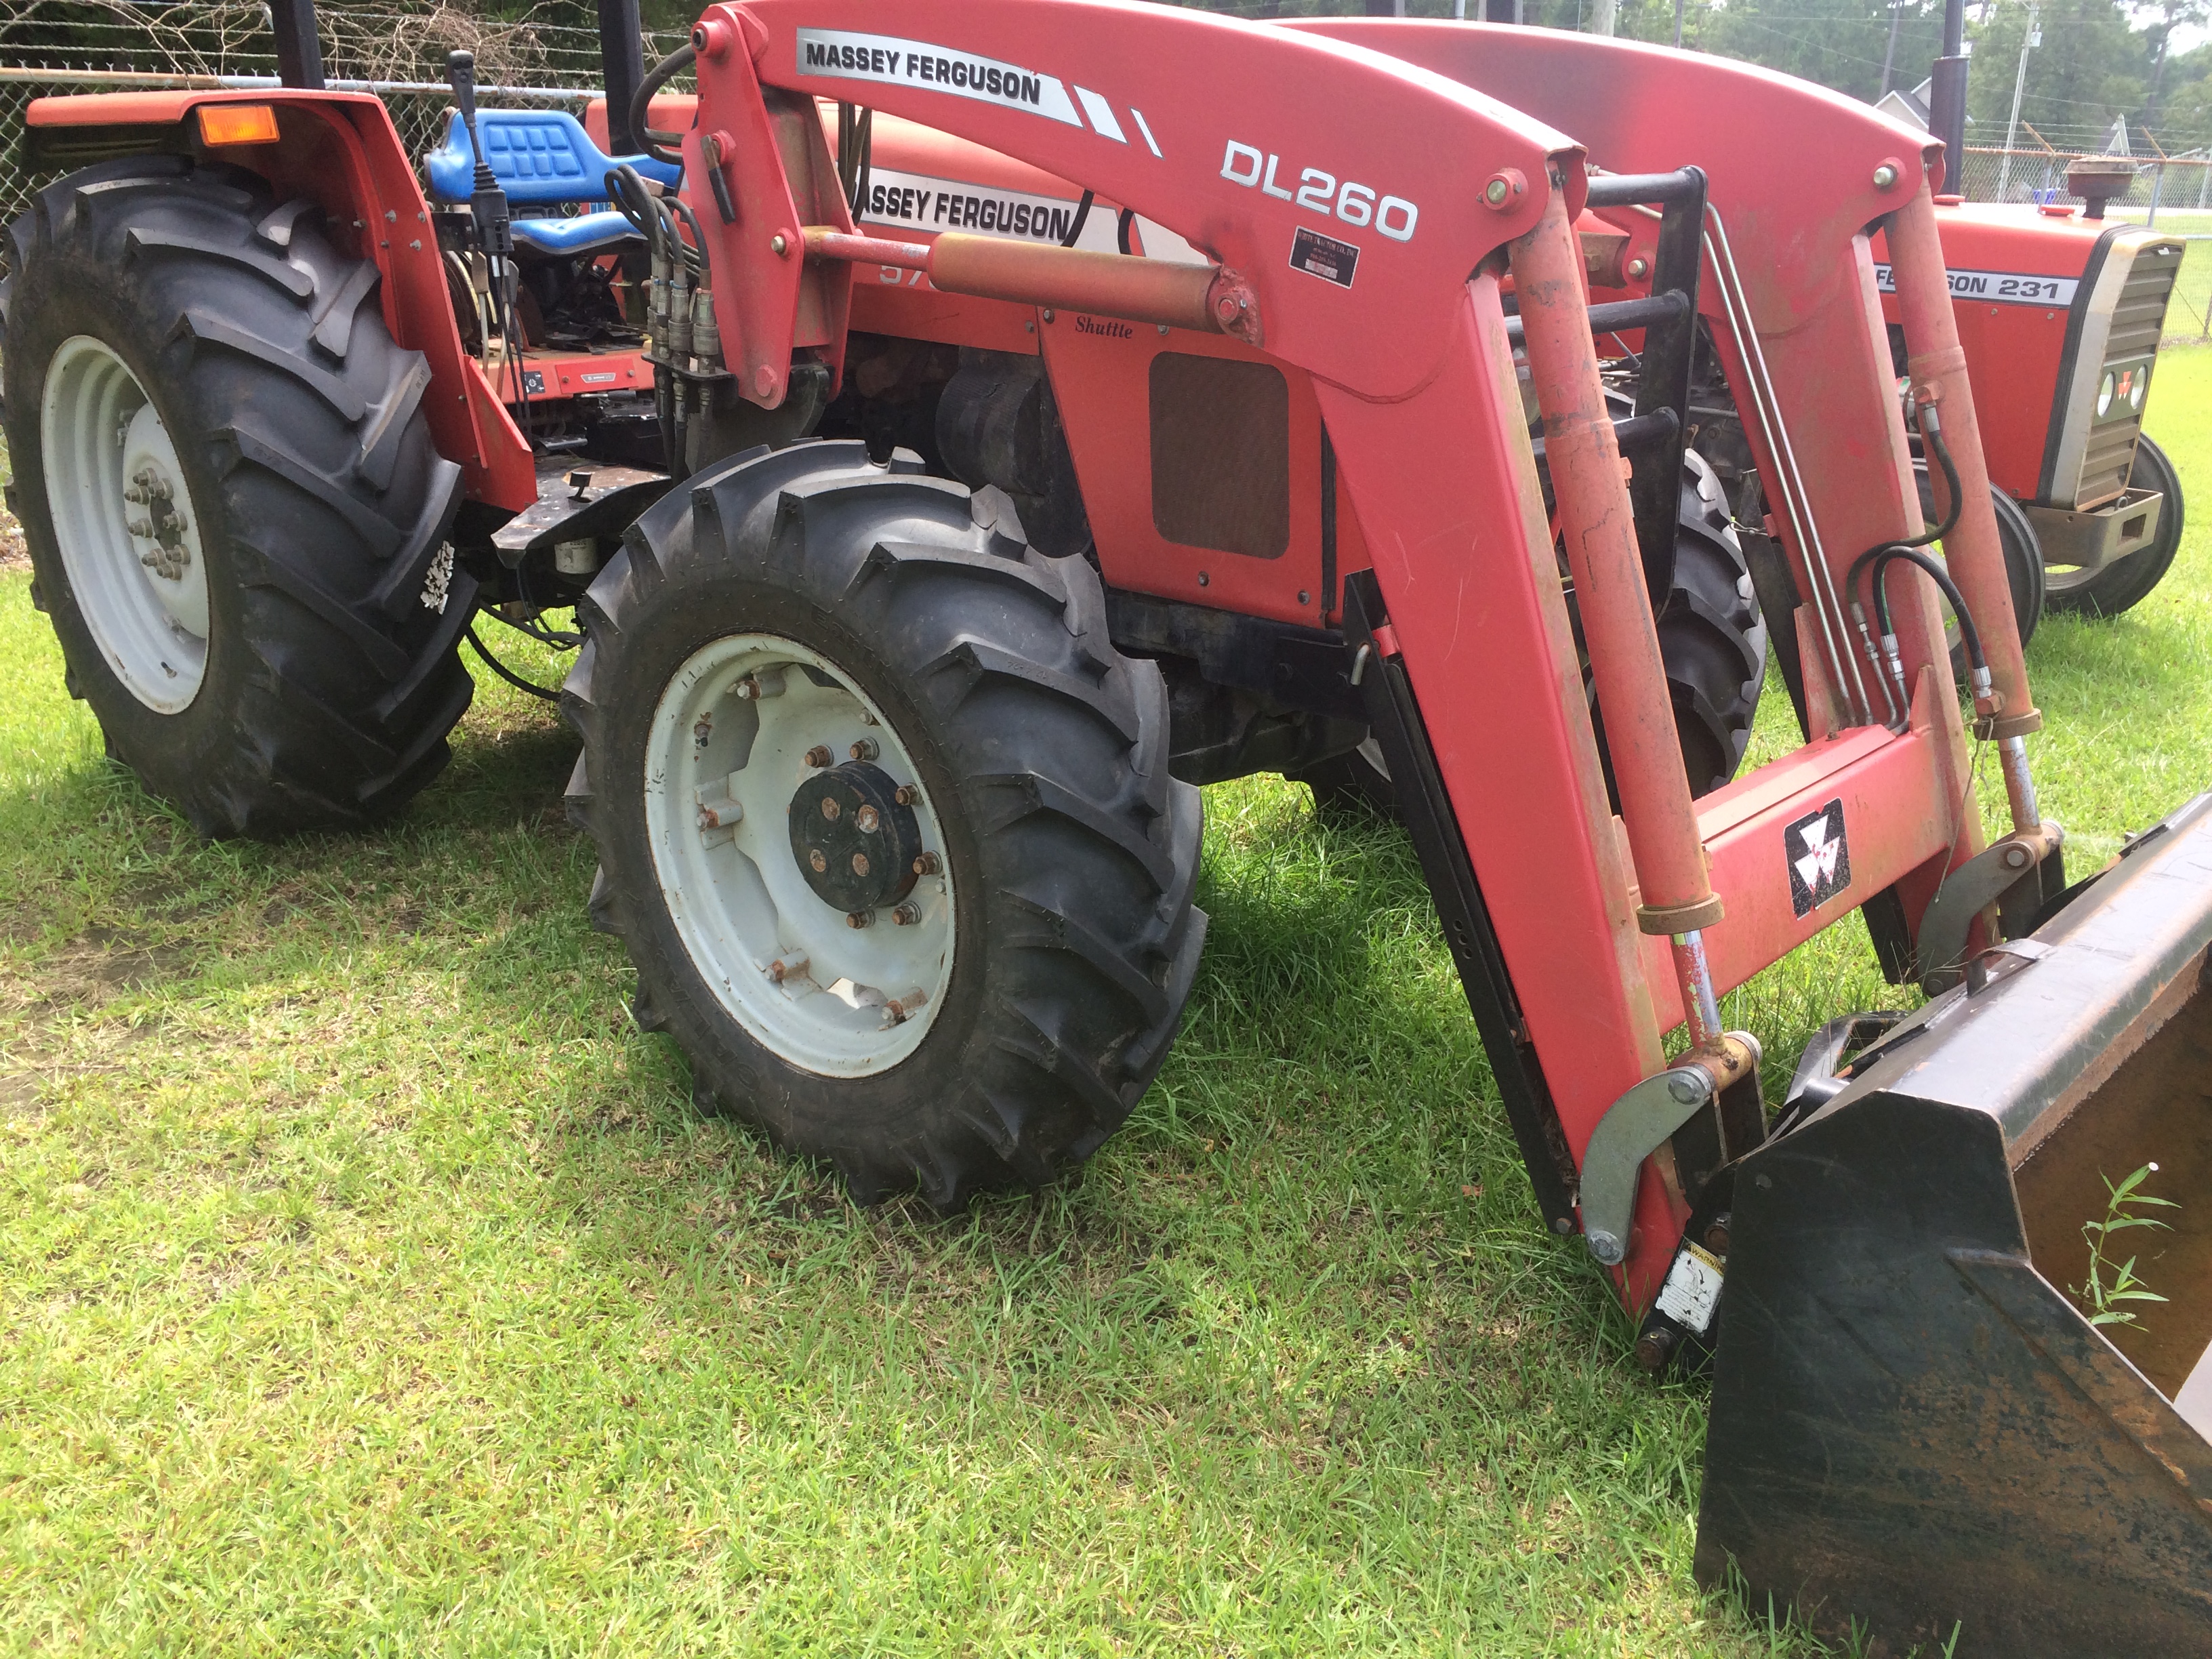 Massey Ferguson 573 Tractor For Sale In Burgaw Nc Ironsearch